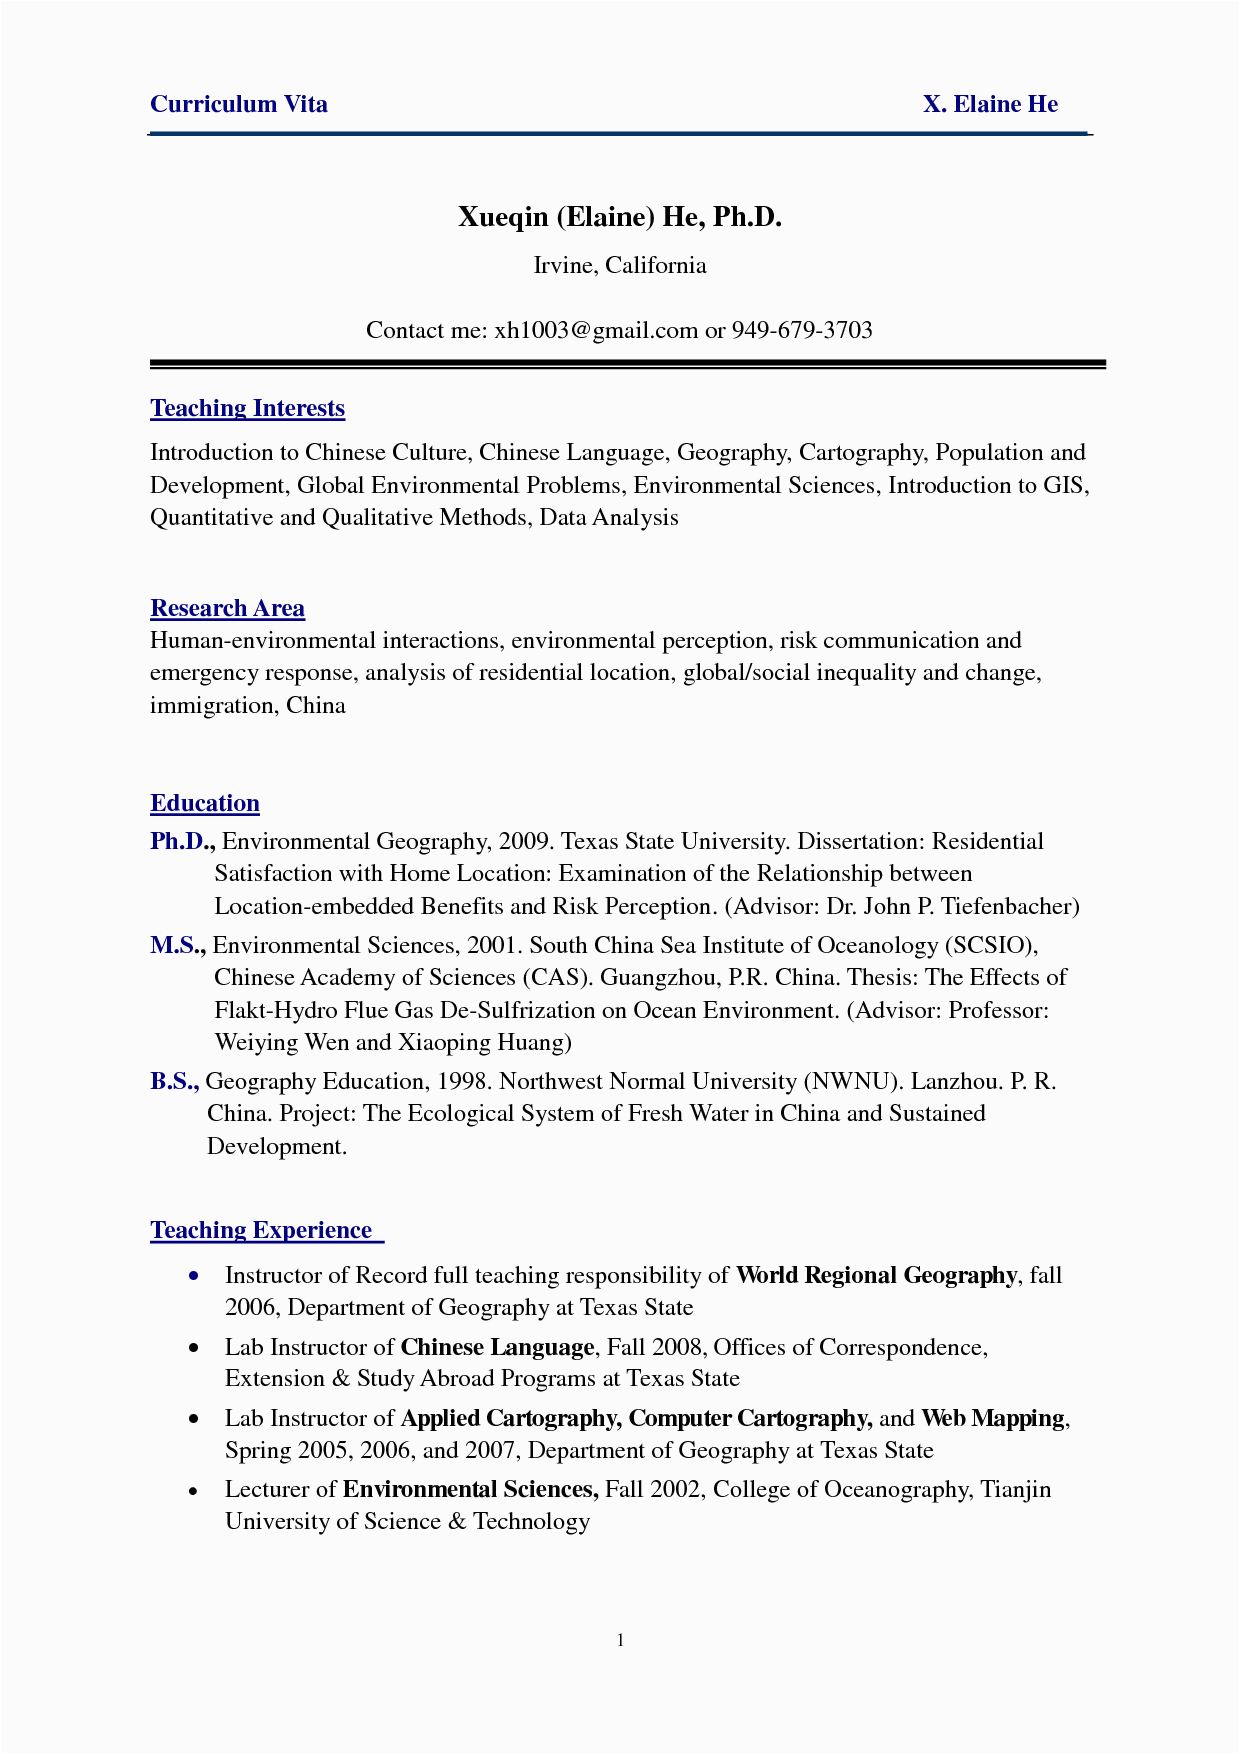 Sample Resume for Lpn New Grad New Grad Lpn Resume Sample with Images